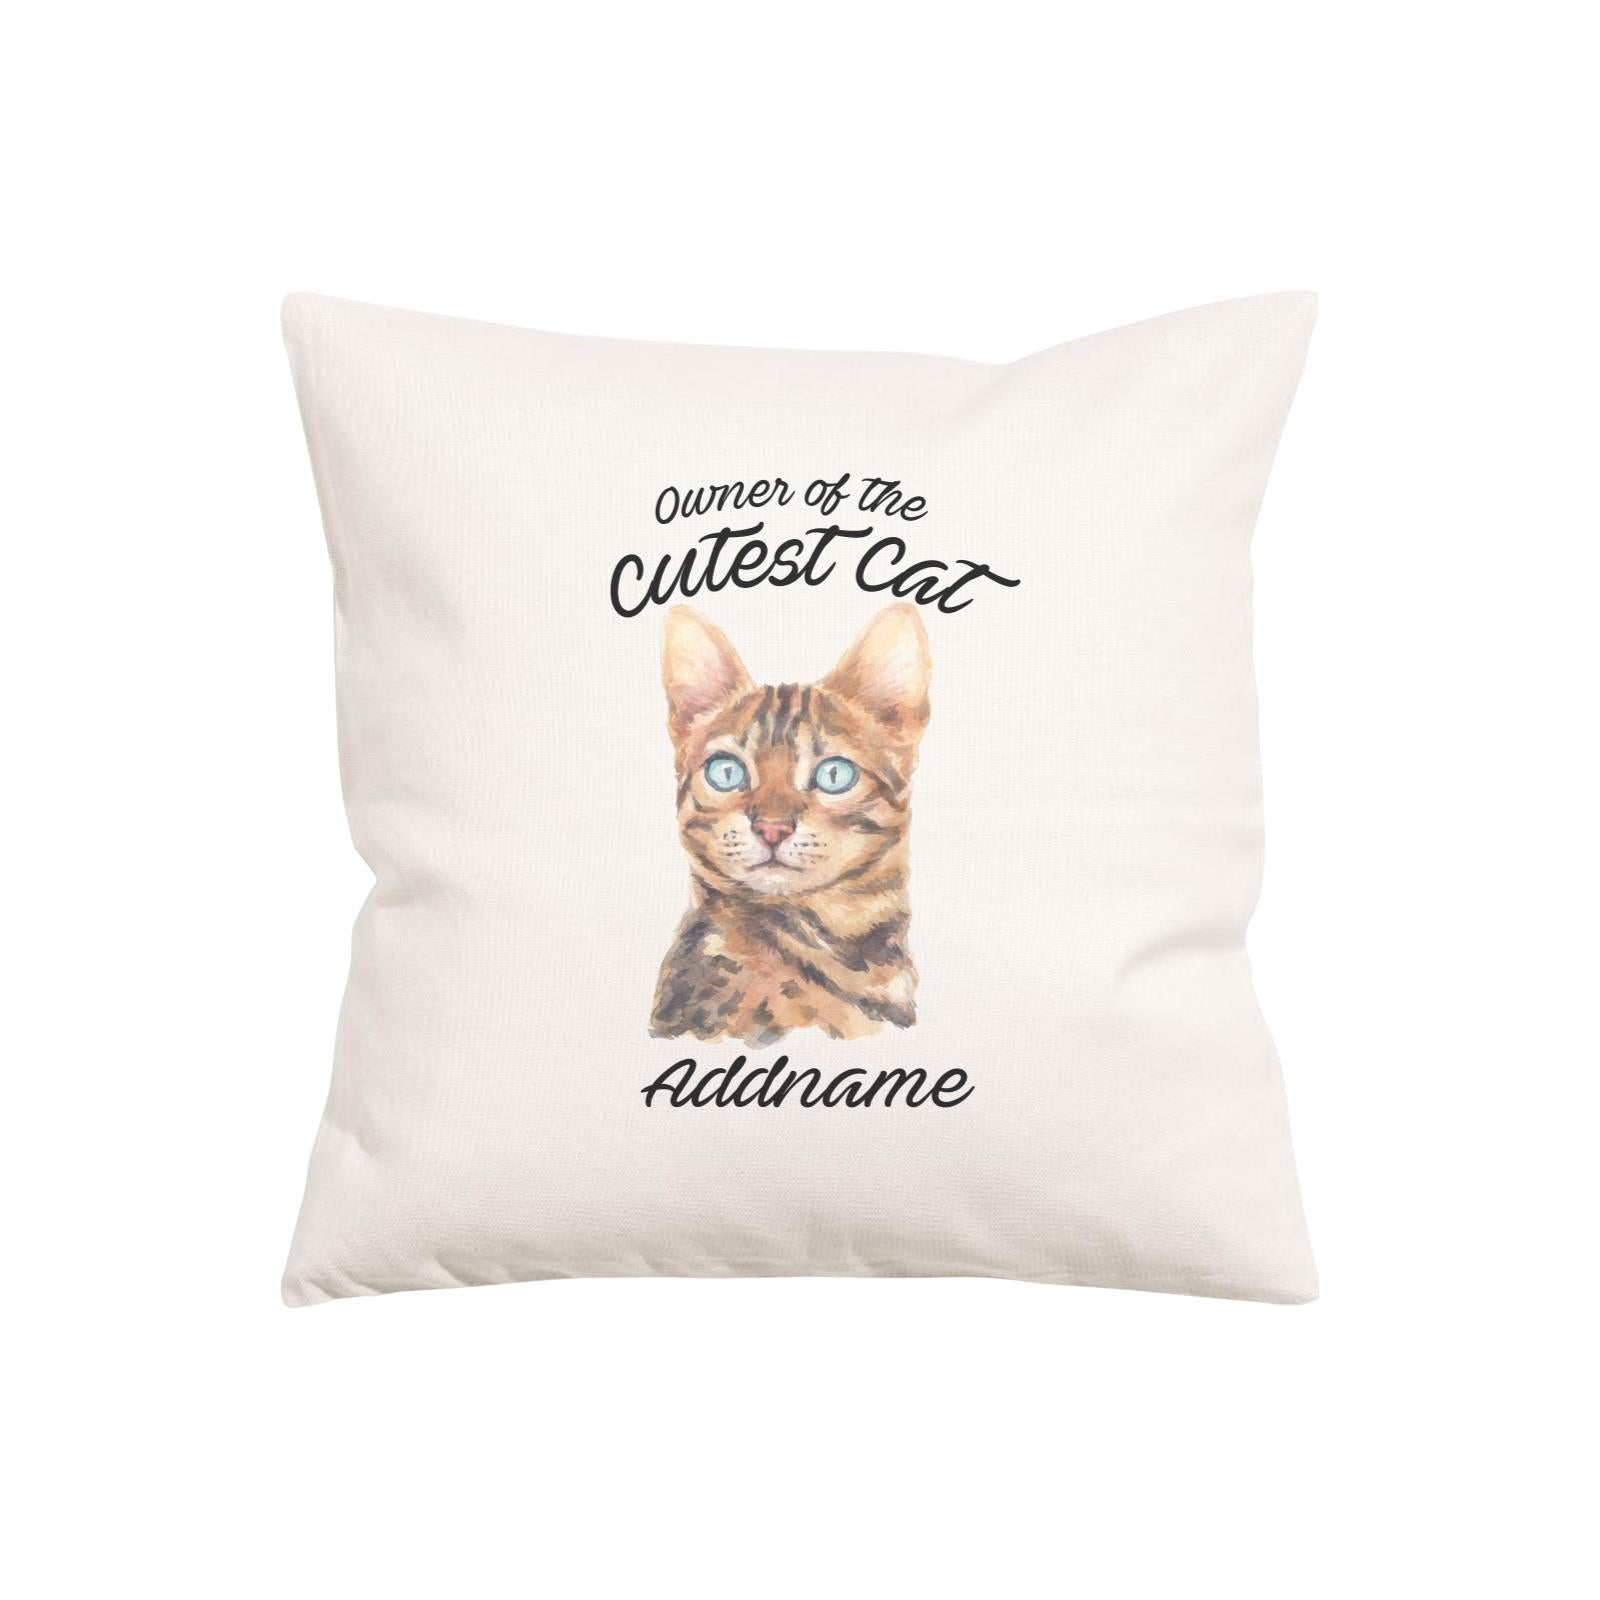 Watercolor Owner Of The Cutest Cat Bengal Addname Pillow Cushion